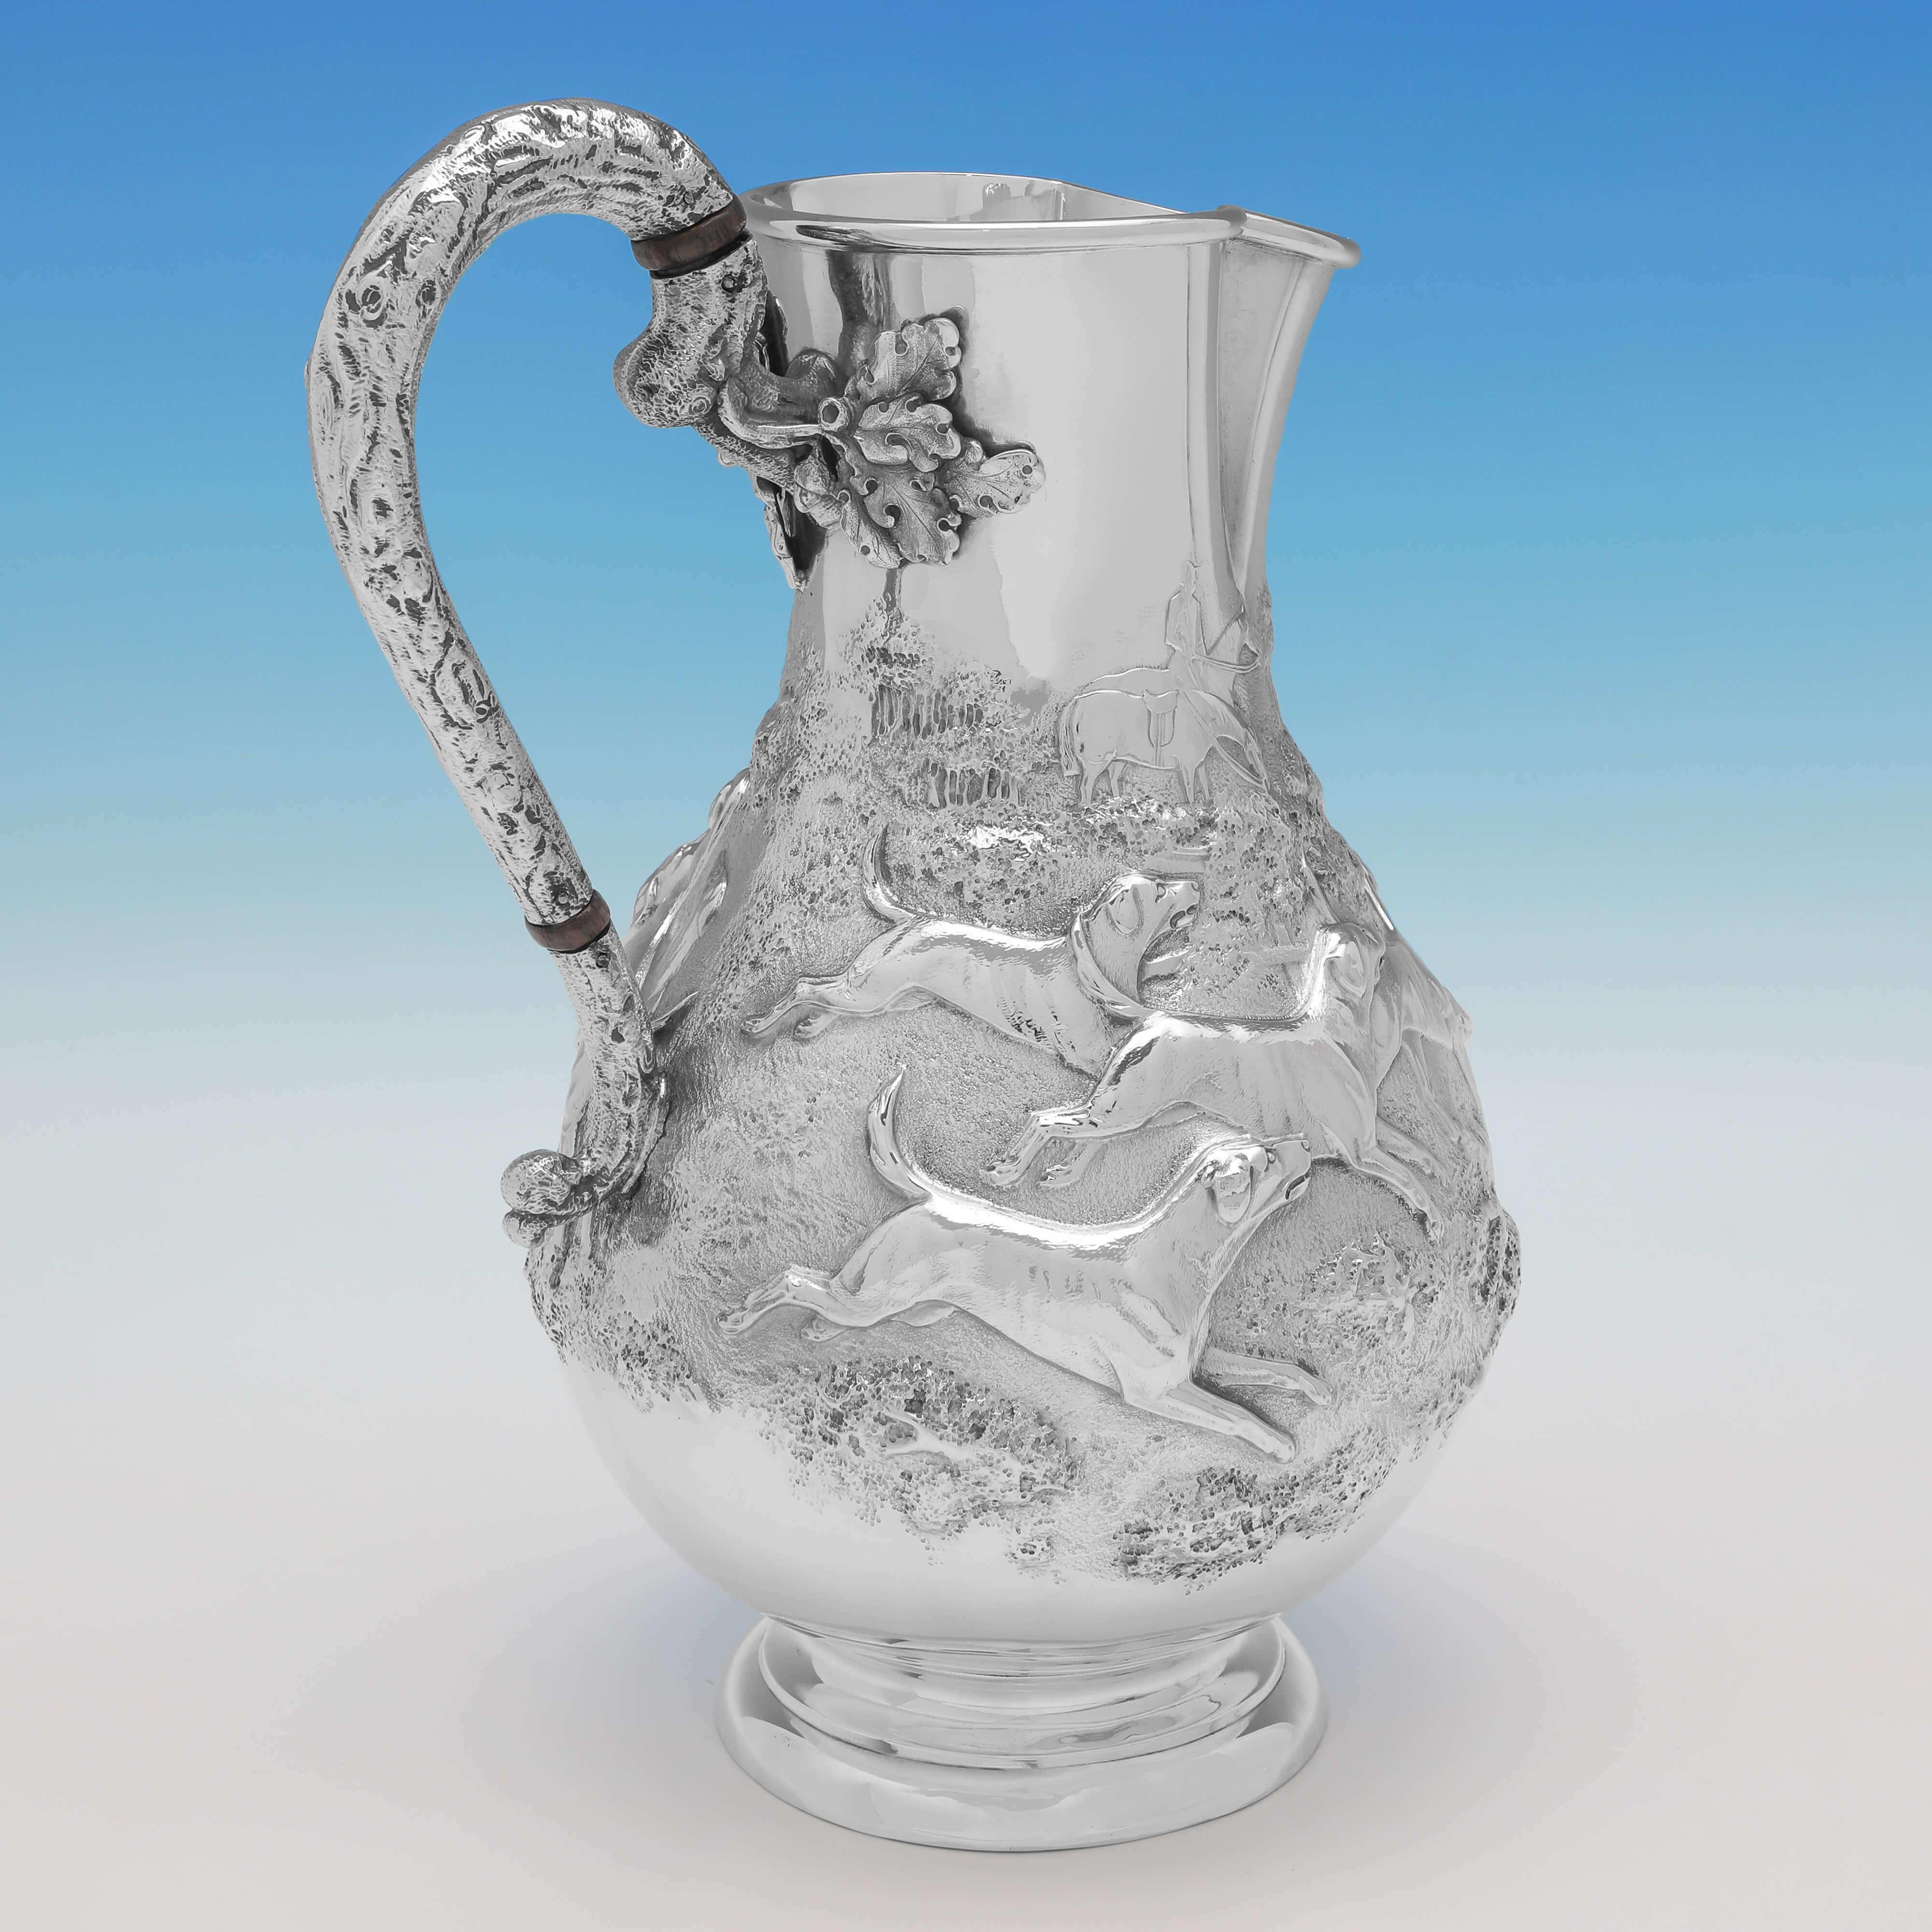 English Racing Interest - Victorian Sterling Silver Water Jug - Jubilee Ladies Cup 1887 For Sale